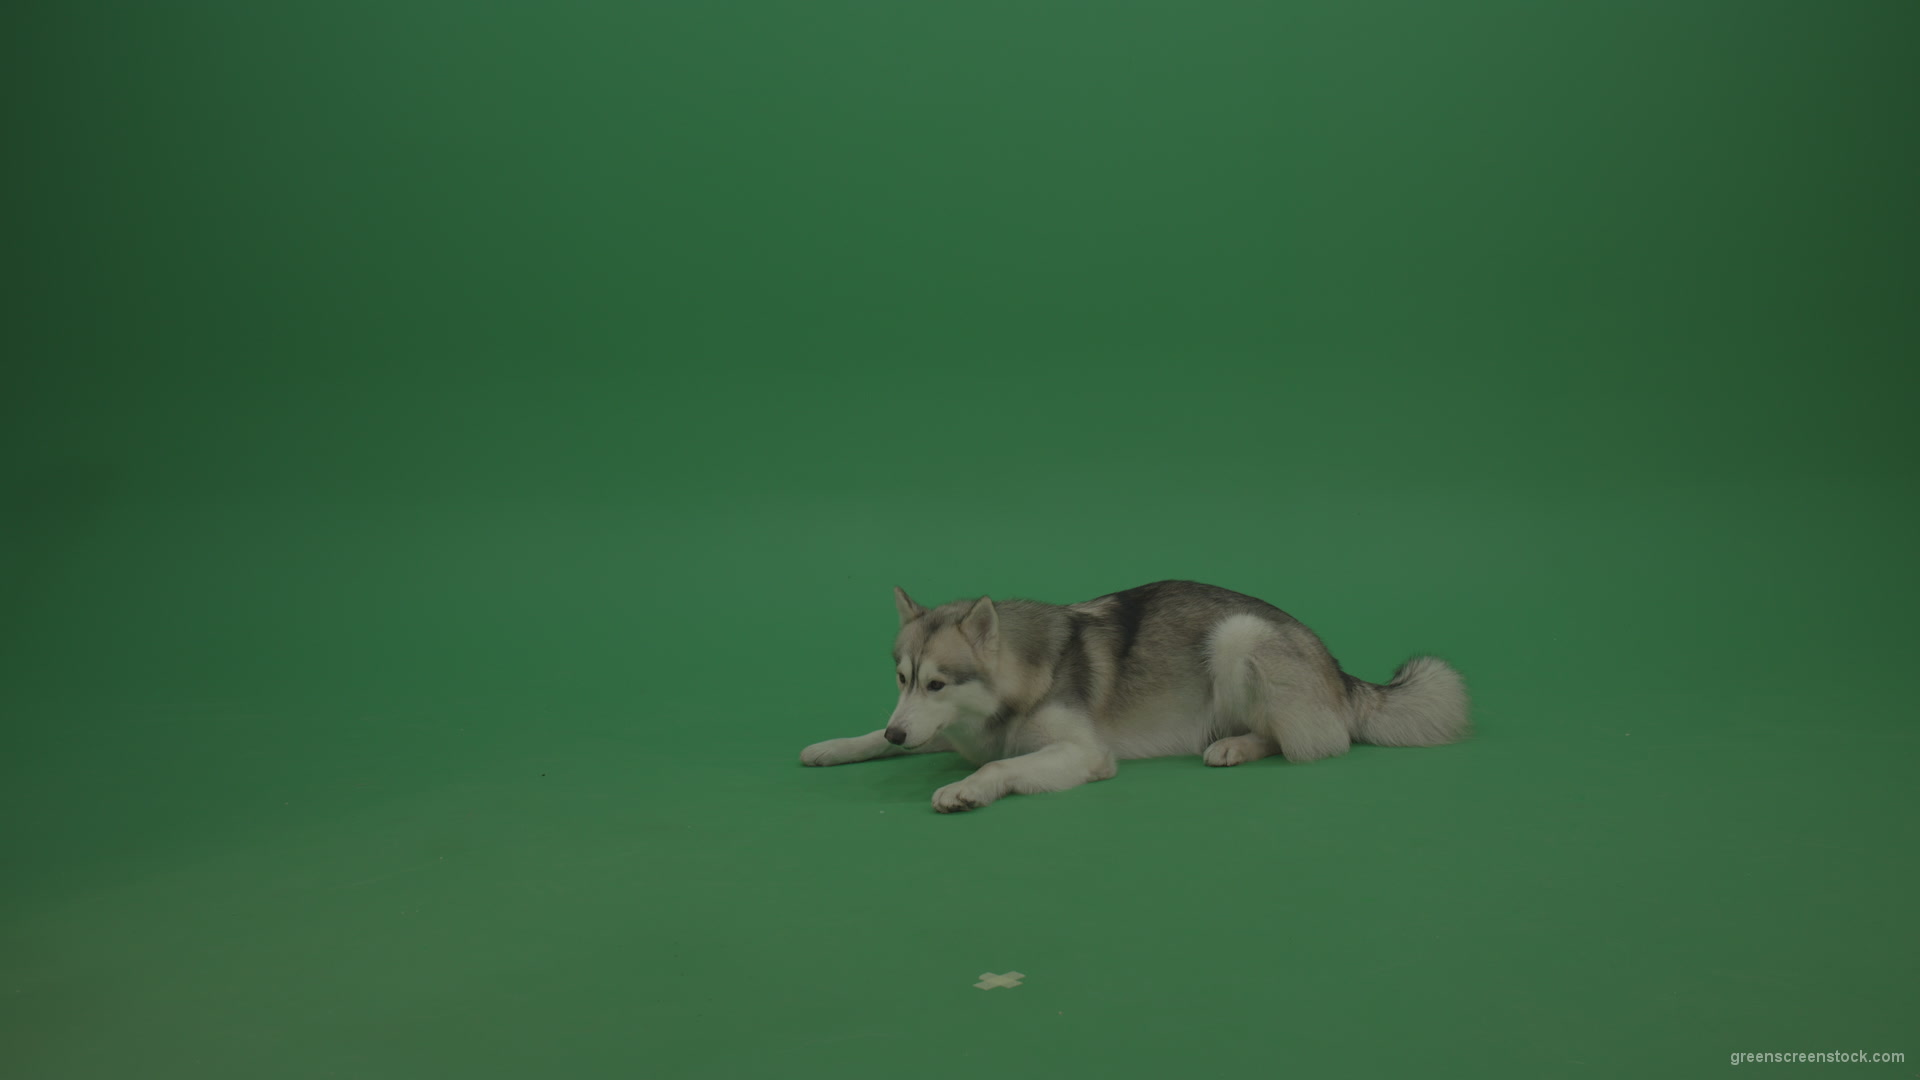 Grey_White_Huskie_Dog_Lying_On_The_Ground_Chewing_Coockie_Stands_Up_And_Walks_Away_Green_Screen_Wall_Background_005 Green Screen Stock